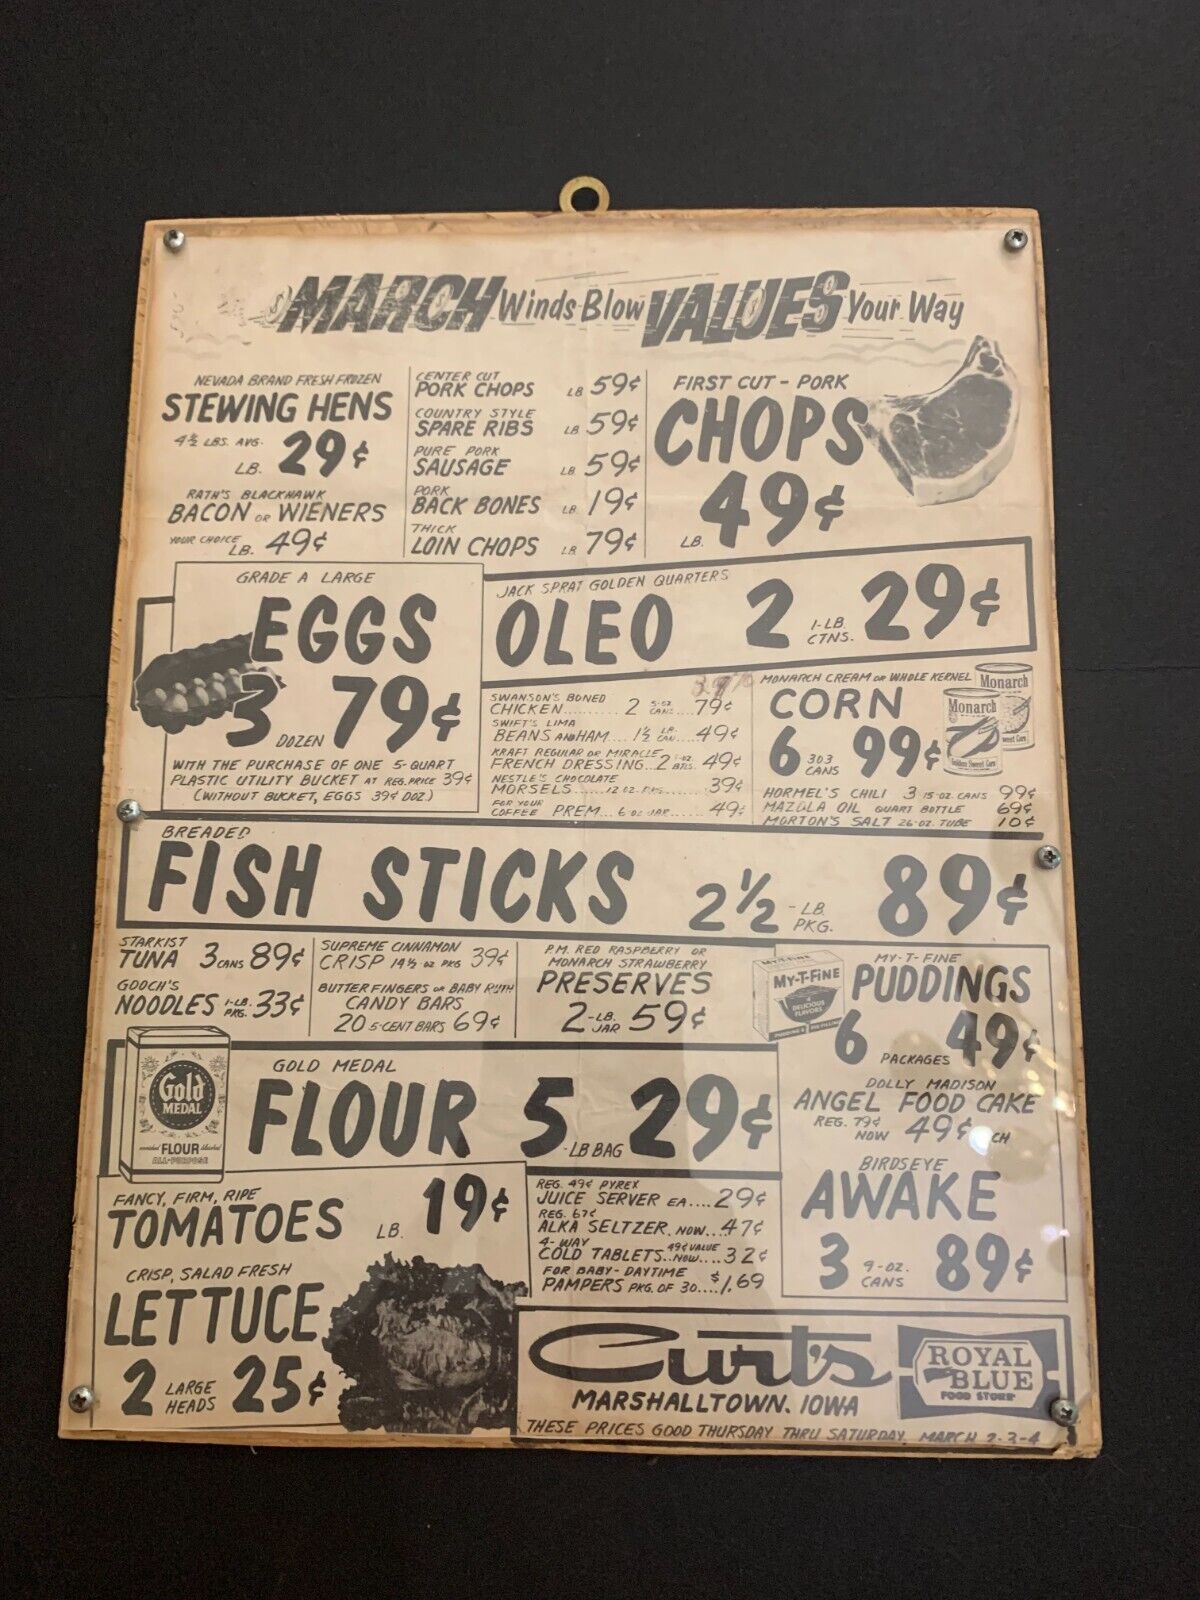 Vintage Curt's Royal Blue Food Store Marshalltown Advertisement March Values